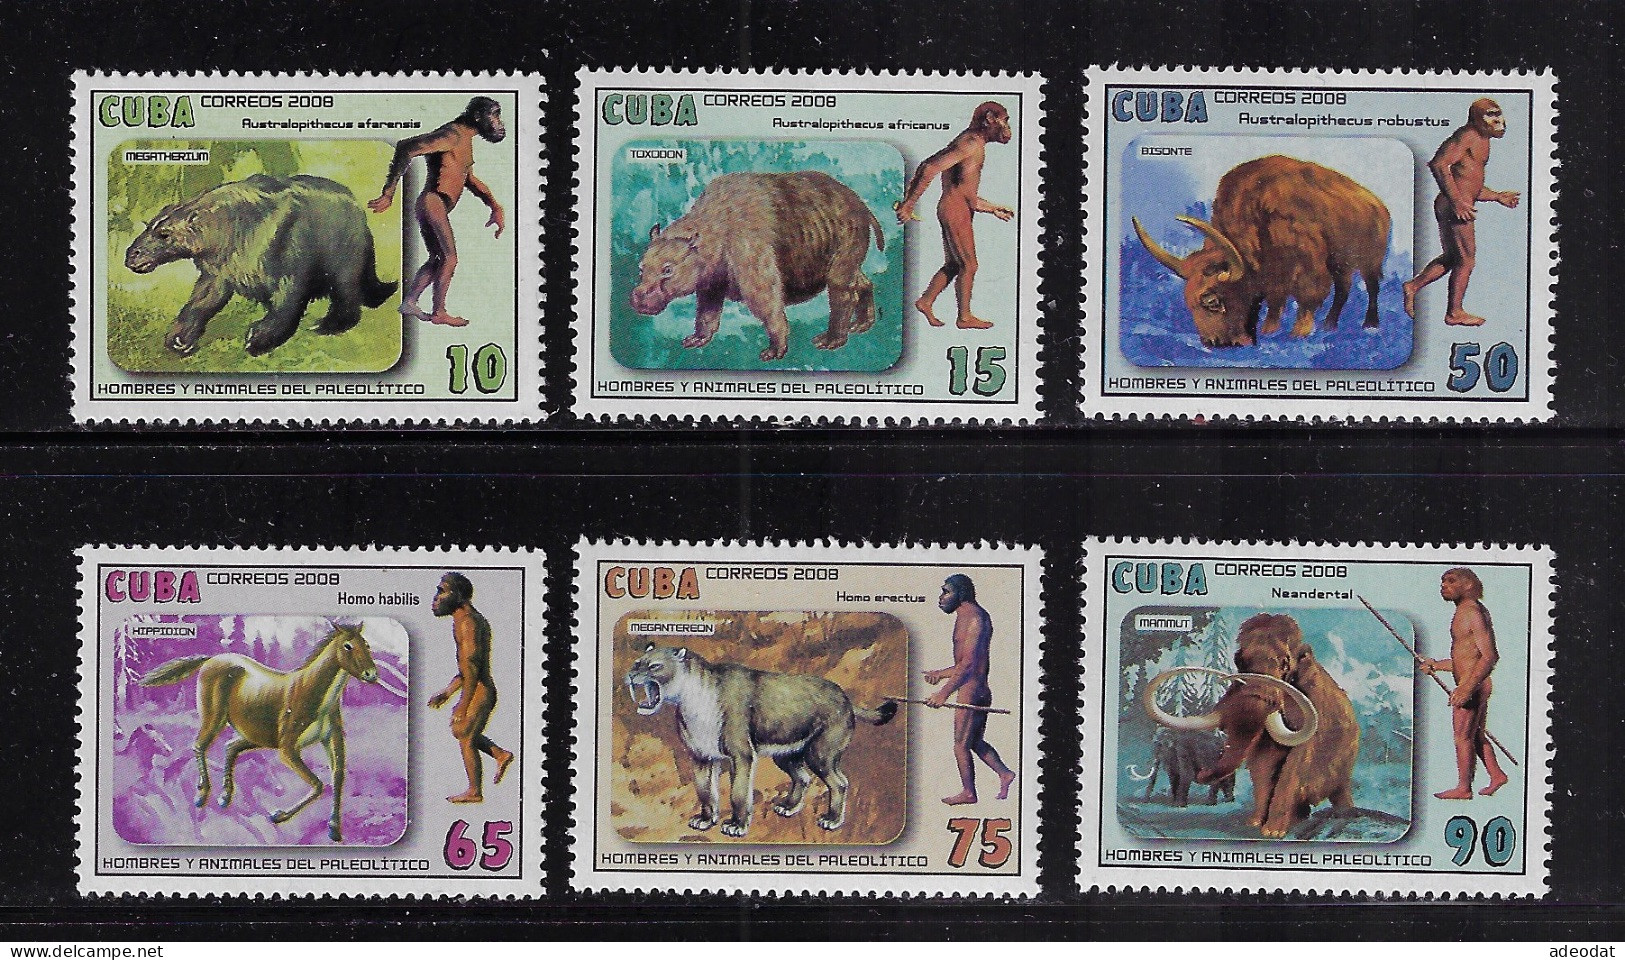 CUBA 2008 STAMPWORLD 5122-5127 MNH - Used Stamps